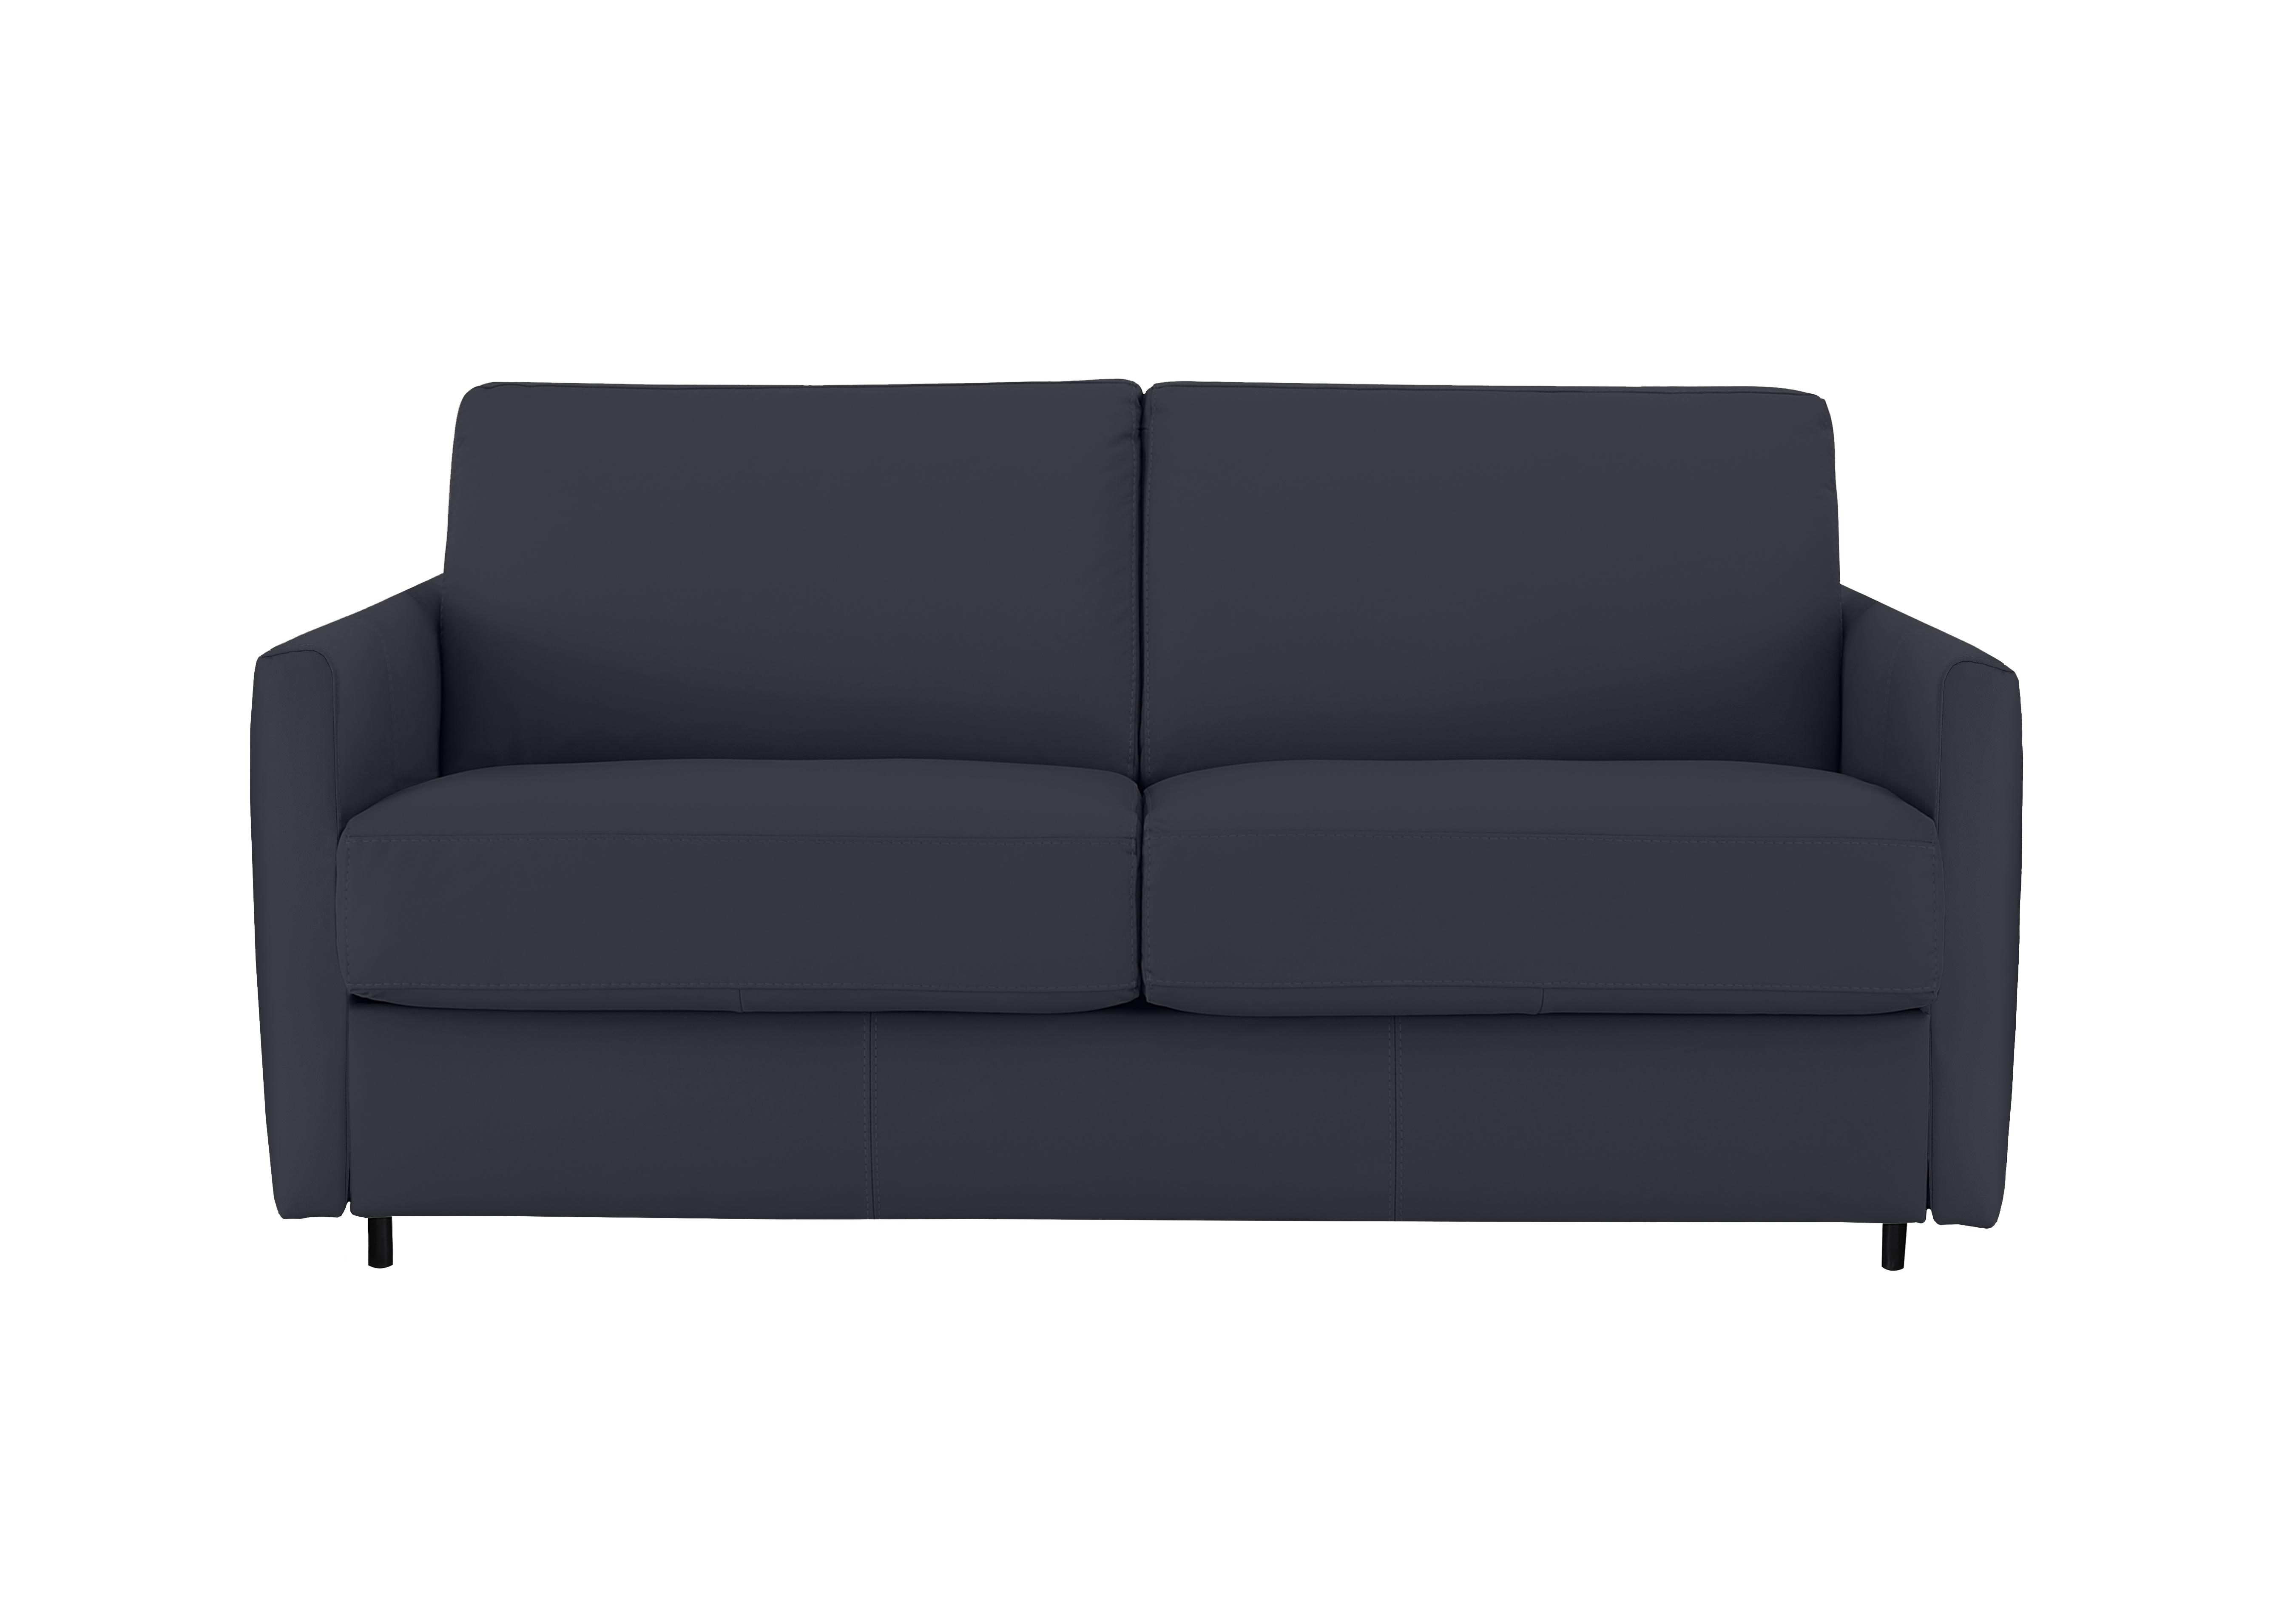 Alcova 2.5 Seater Leather Sofa Bed with Slim Arms in Torello Blu 81 on Furniture Village